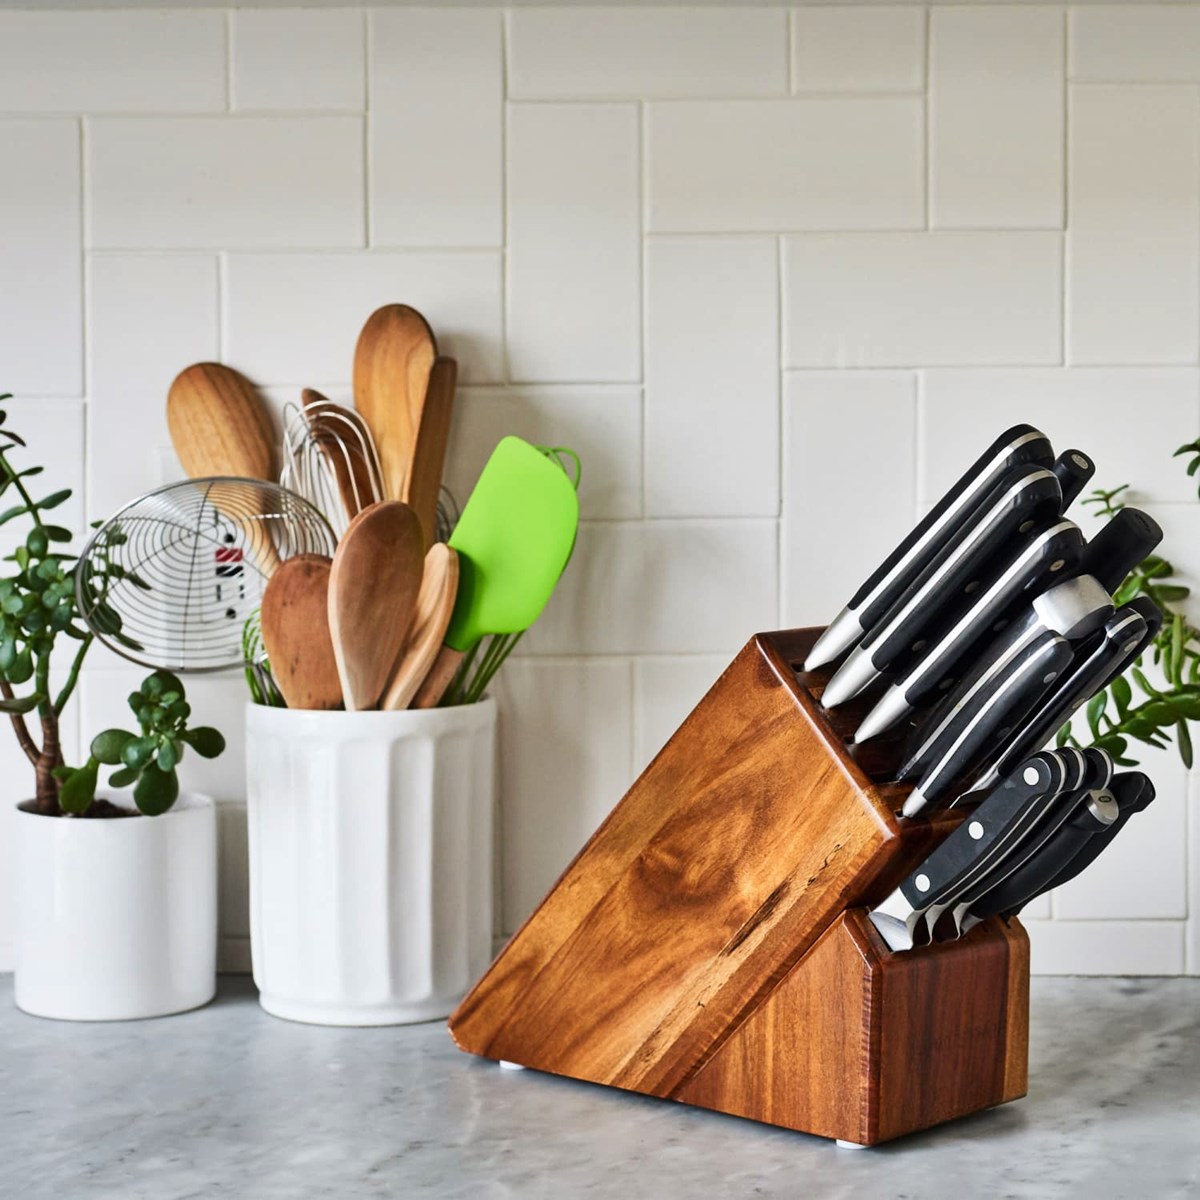 Where To Put Knife Block In Kitchen